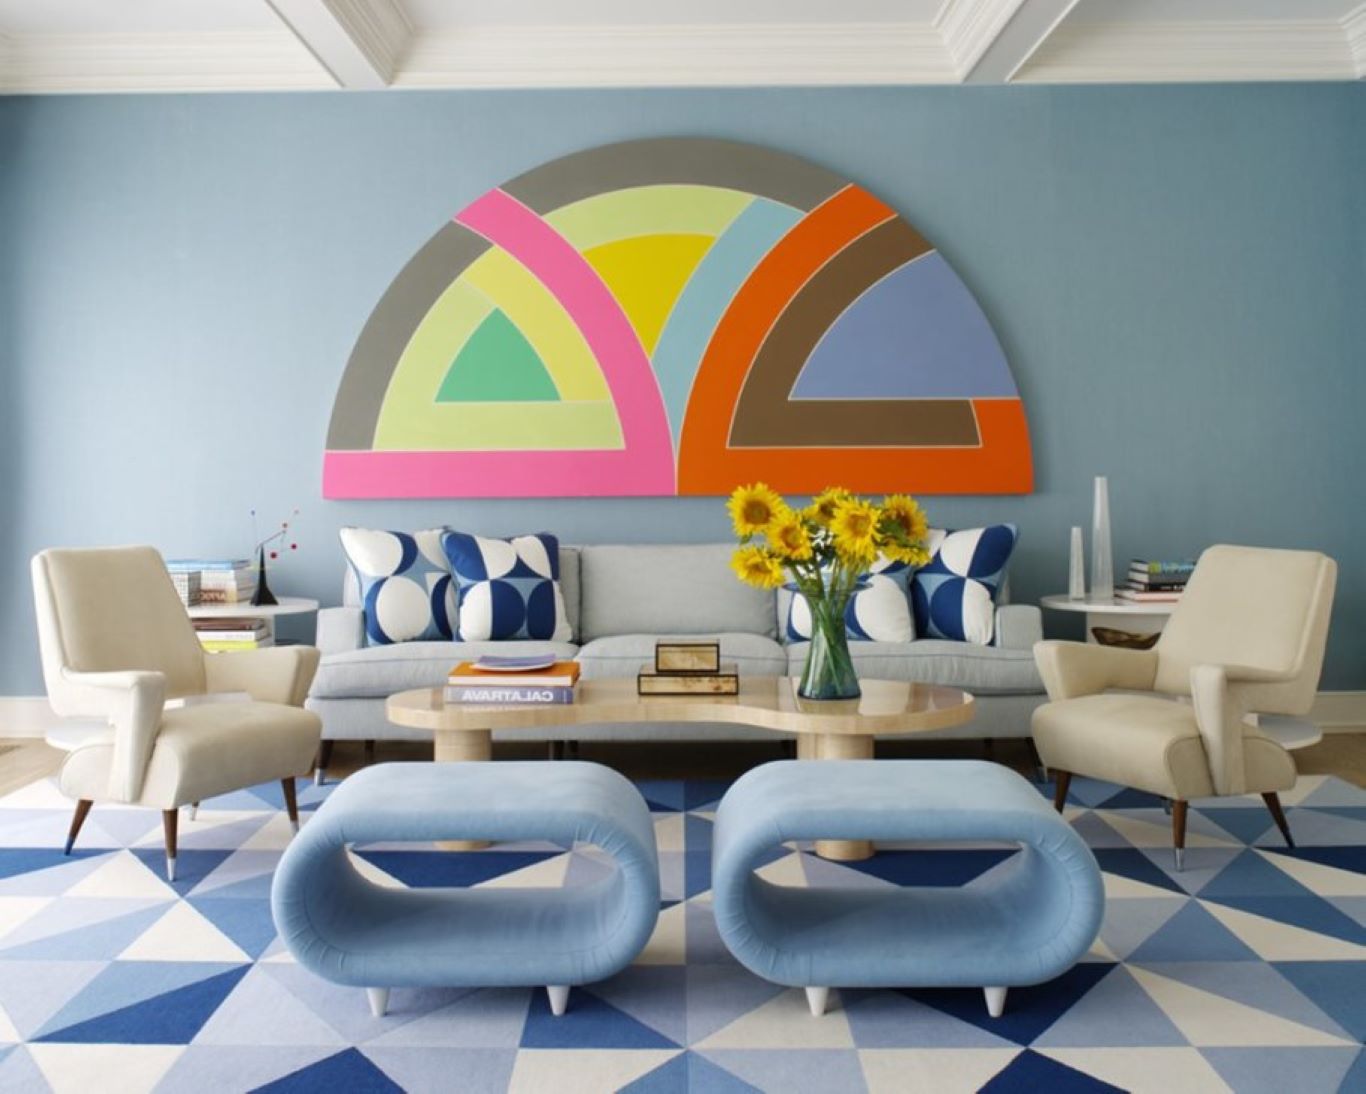 A classic Retro living room featured by colorful geometric patterns and forms